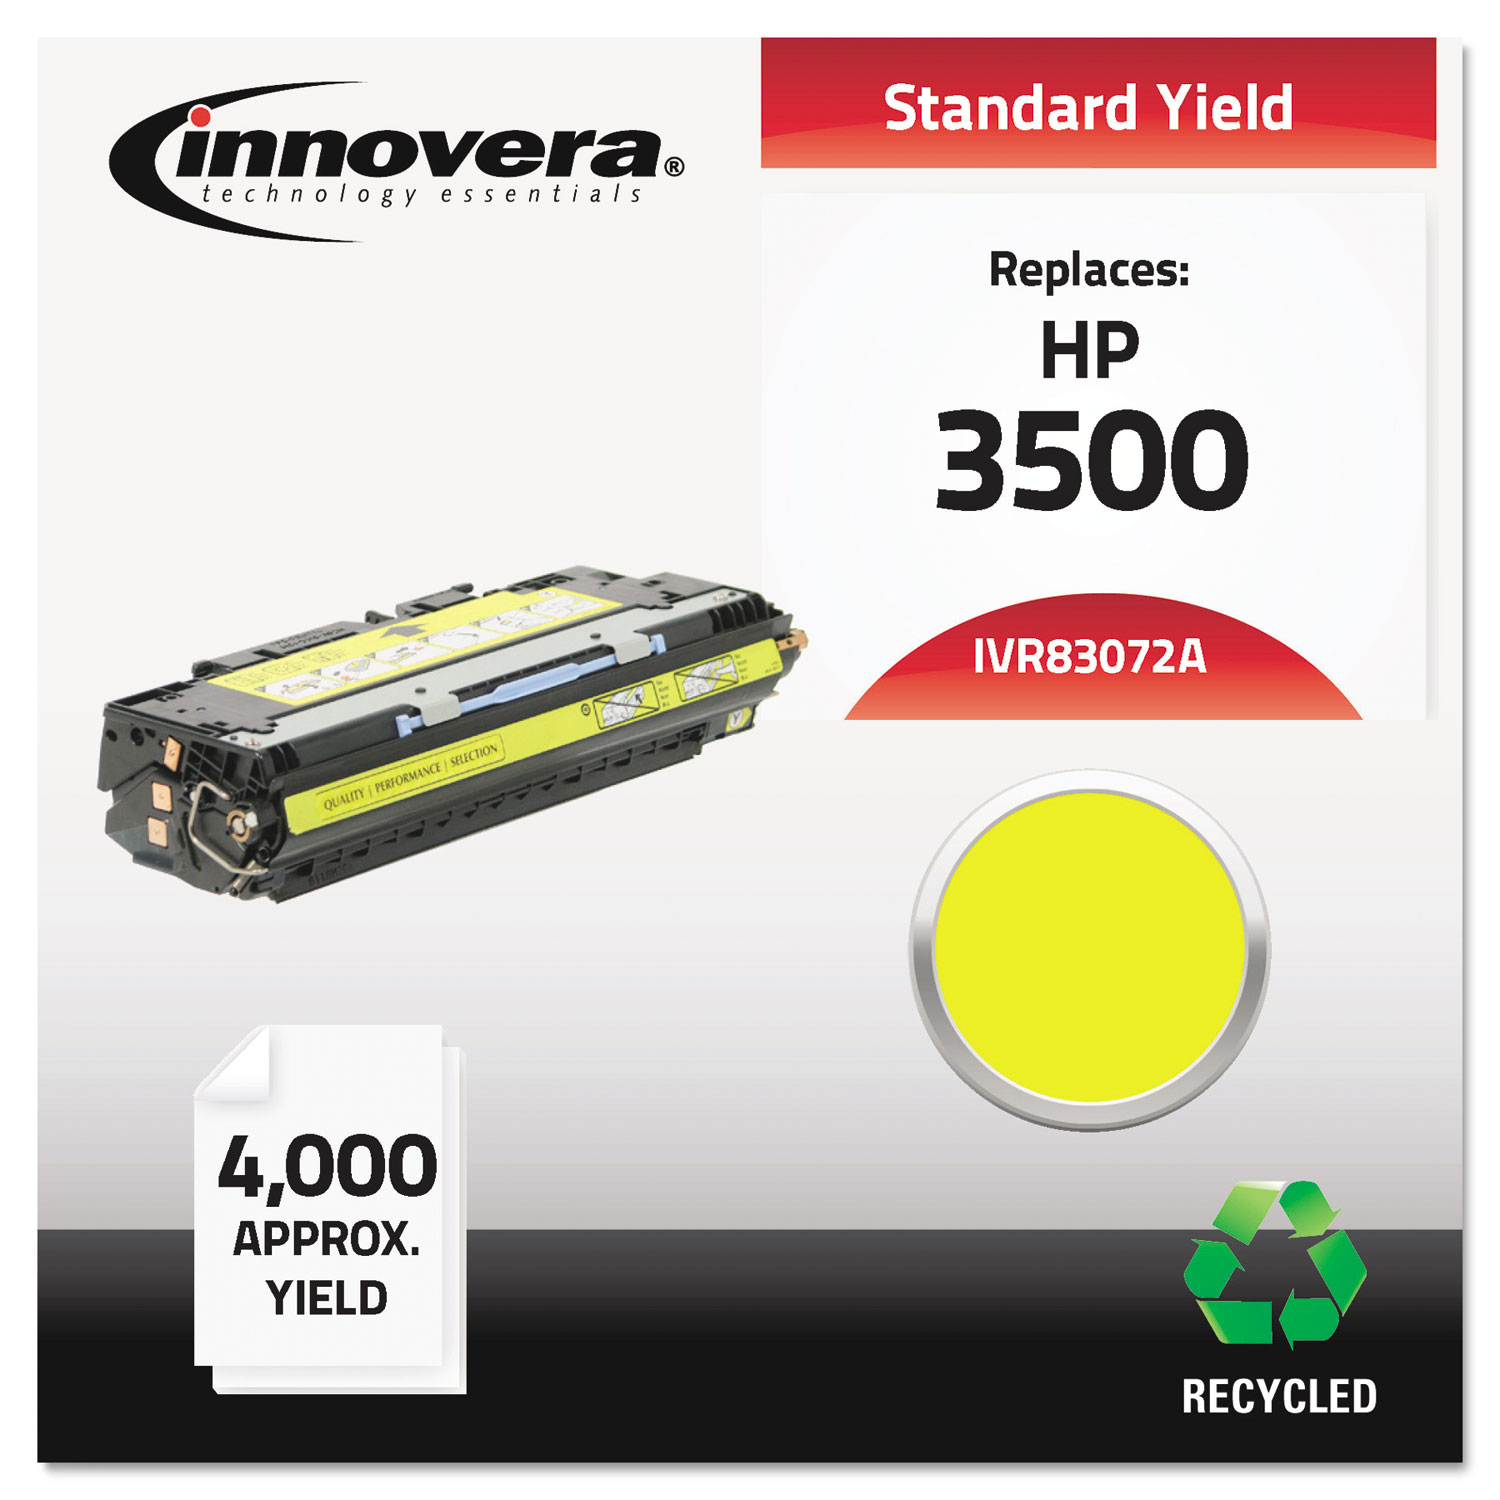  Innovera IVR83072A Remanufactured Q2672A (309A) Toner, 4000 Page-Yield, Yellow (IVR83072A) 